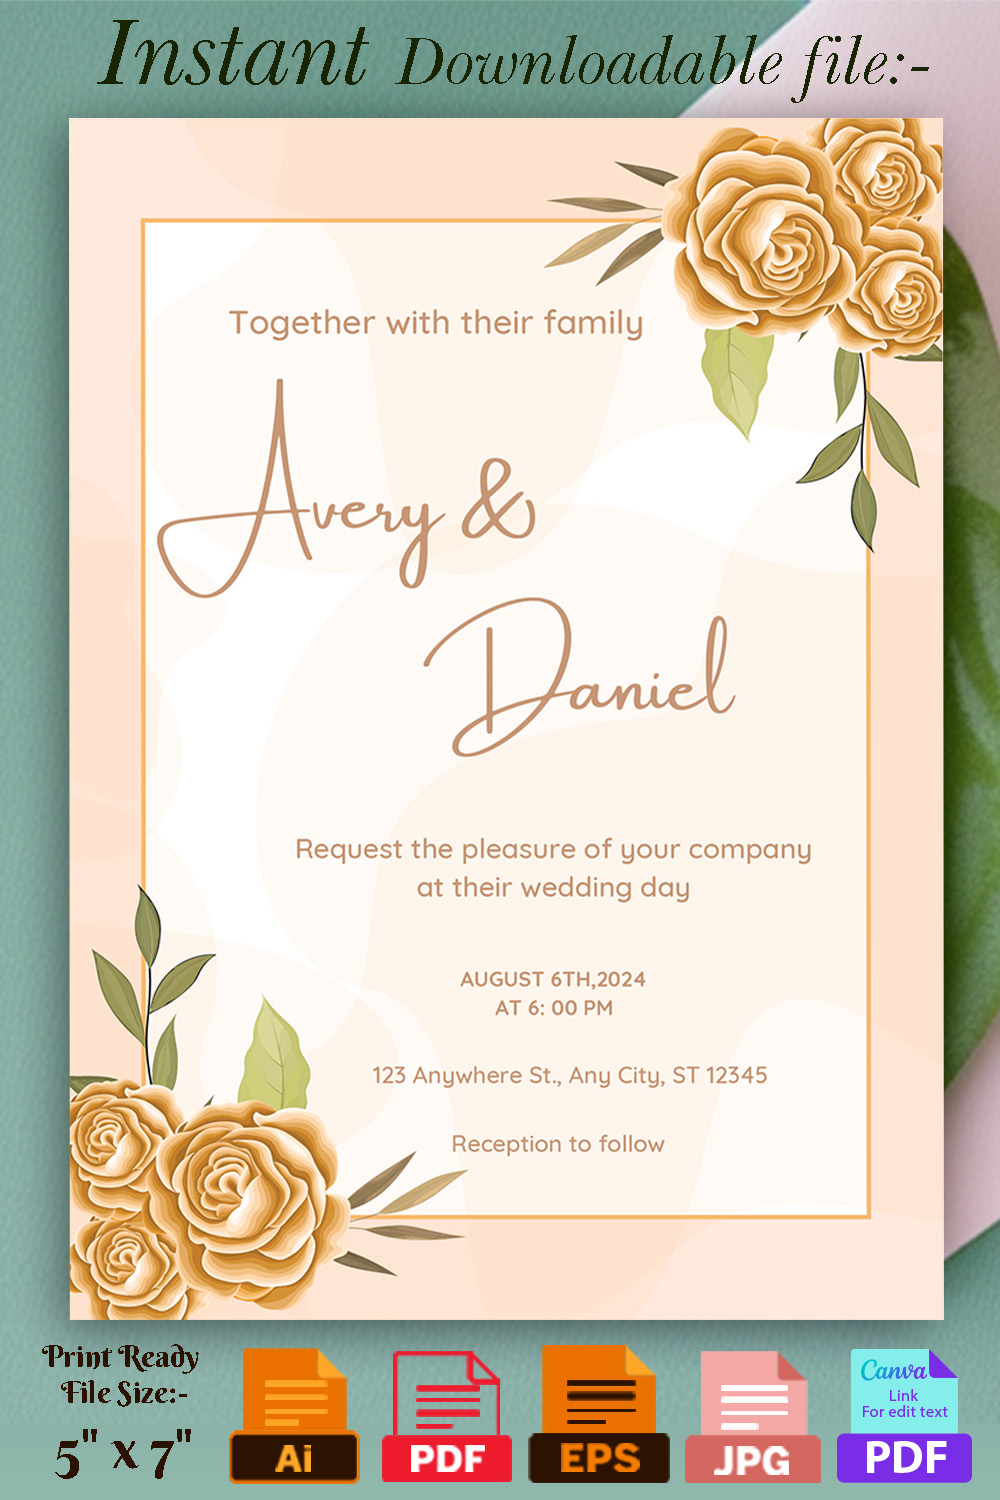 Image with exquisite wedding invitation card with gold color roses.